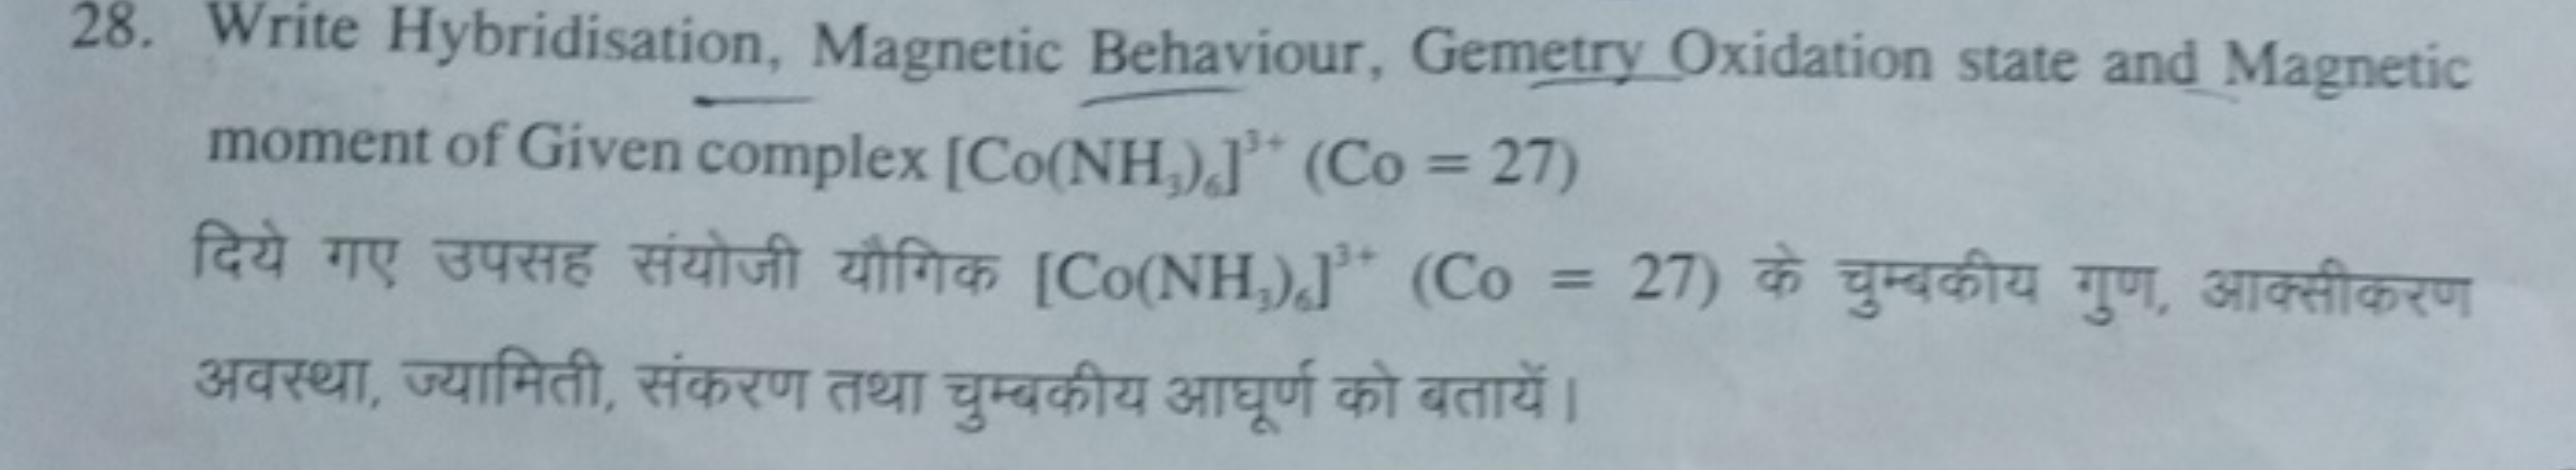 28. Write Hybridisation, Magnetic Behaviour, Gemetry Oxidation state a